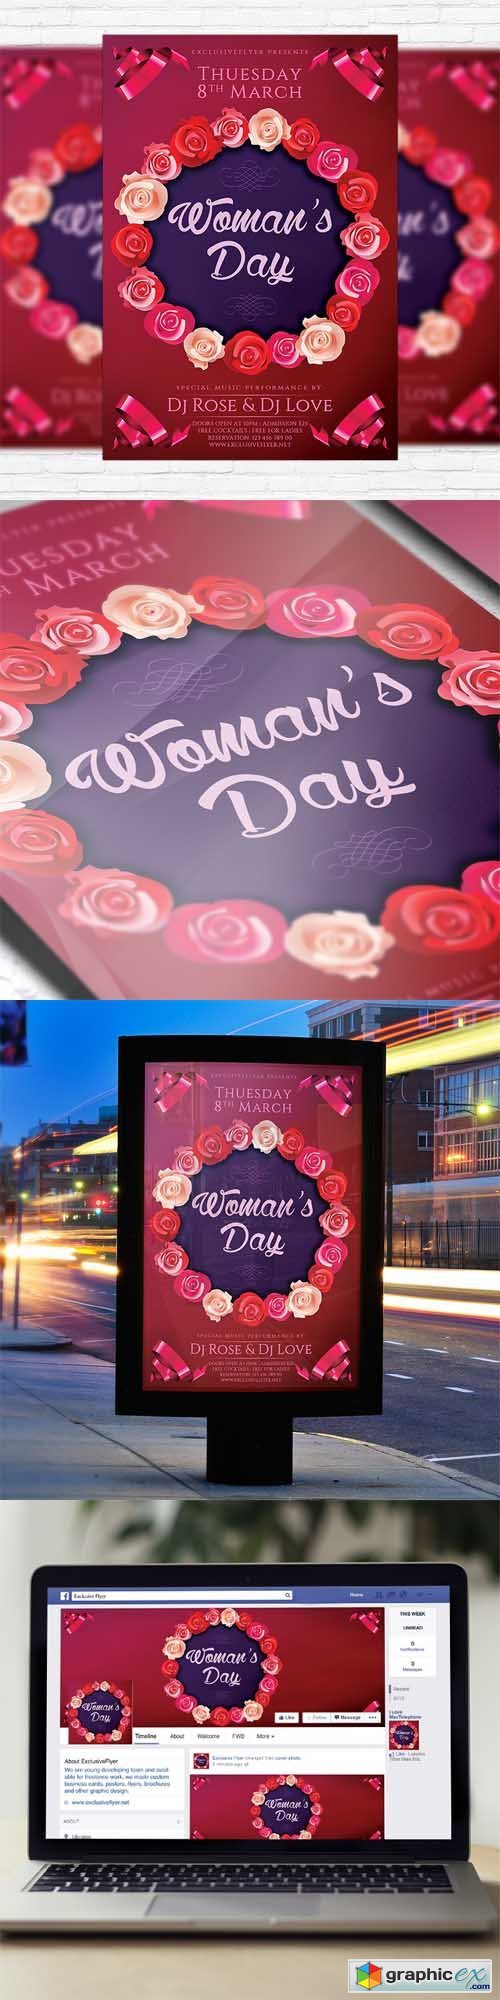 Womens Day - Flyer Template + Facebook Cover